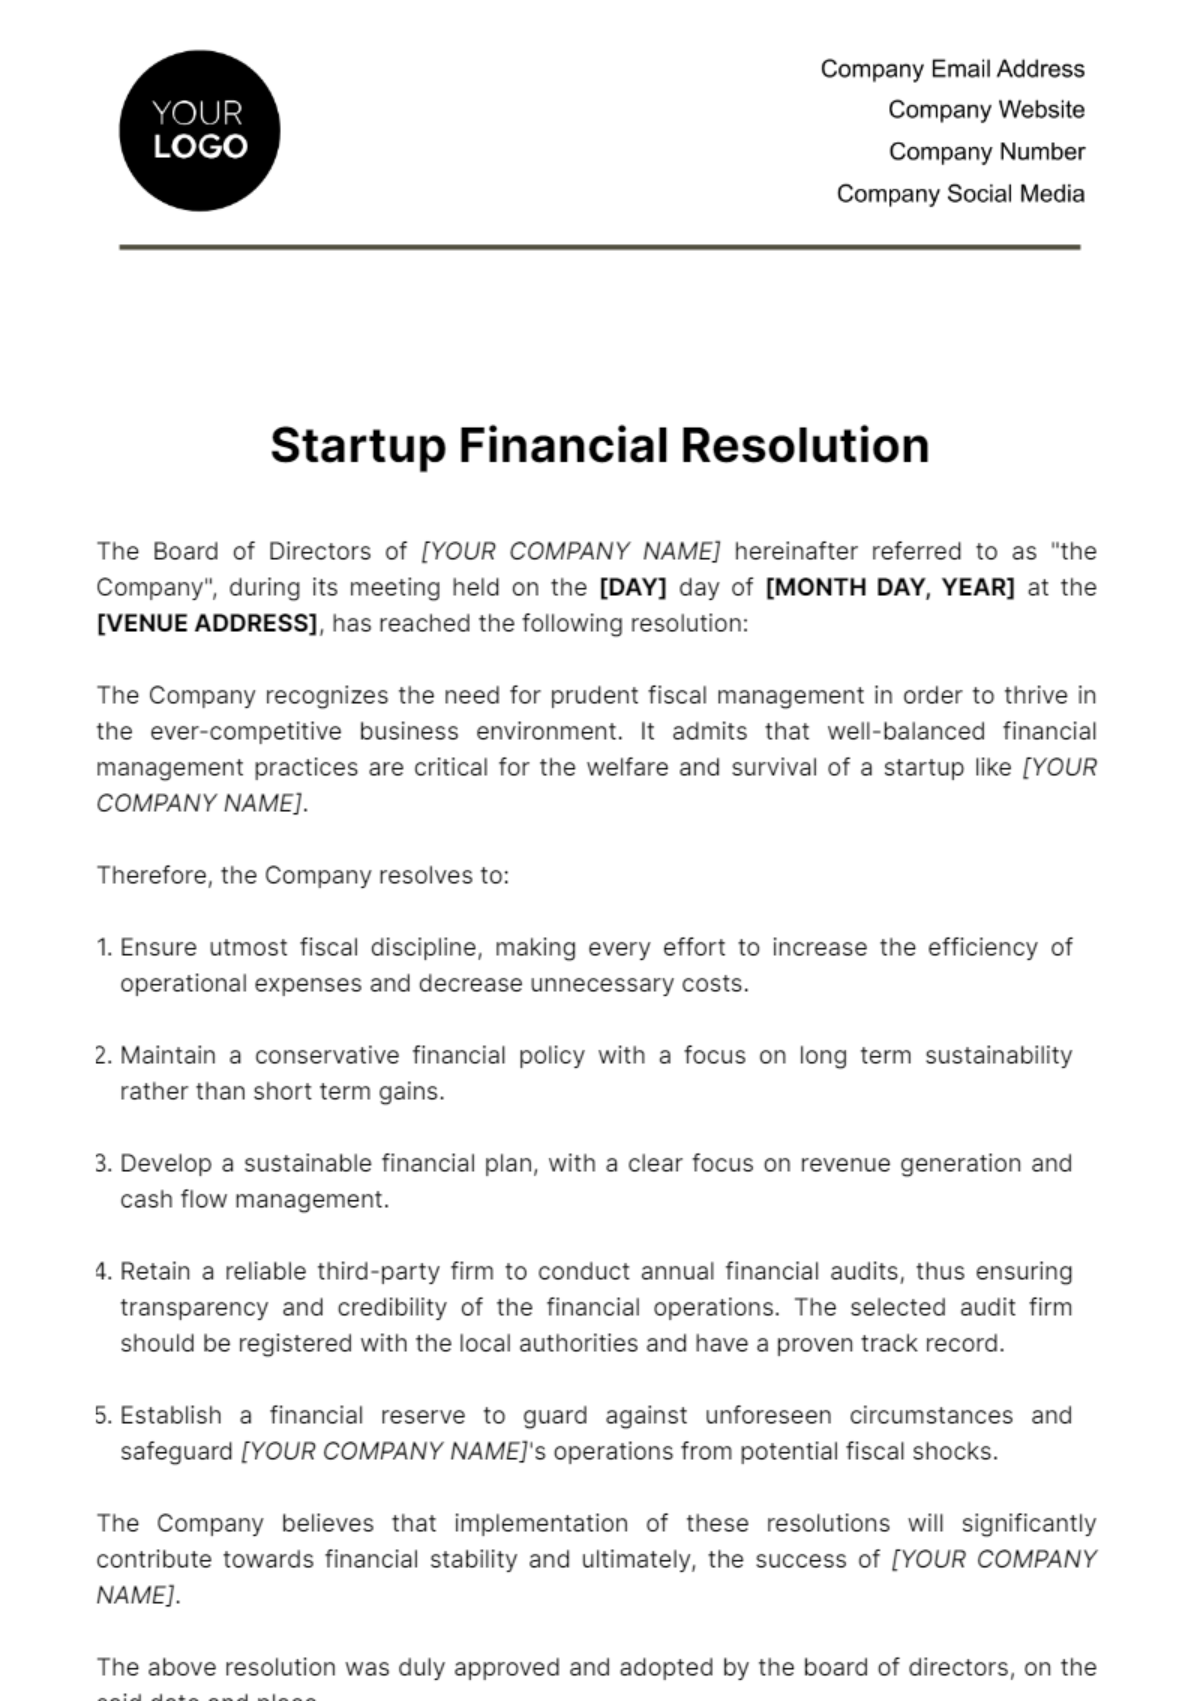 Free Startup Financial Resolution Template